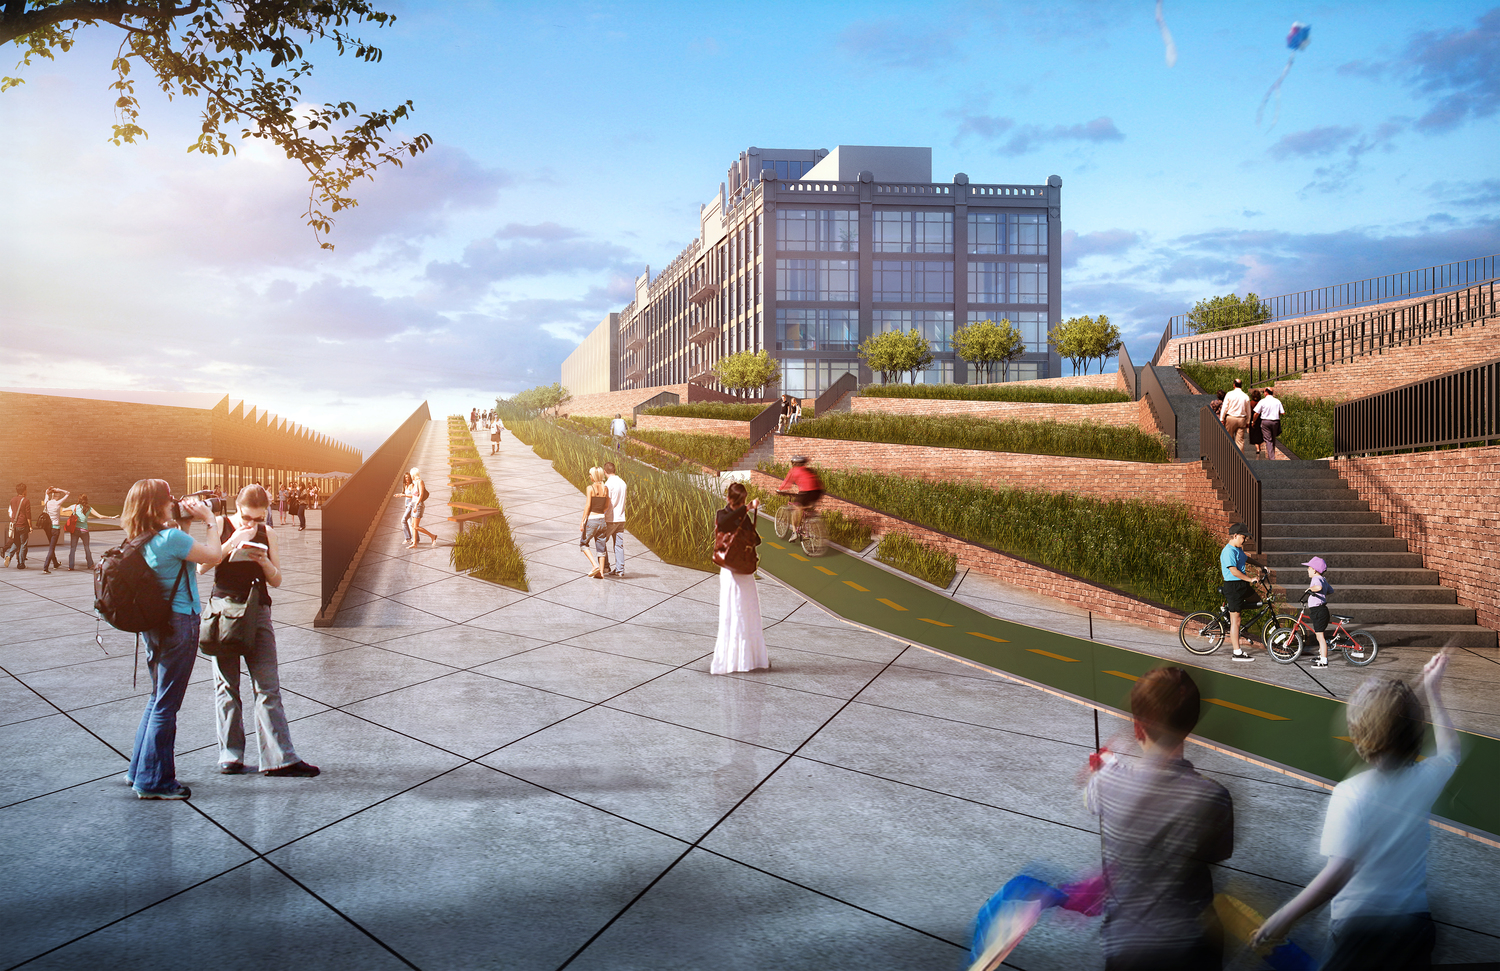 Est4te Four's Red Hook office complex and park, rendering by Raft Architects